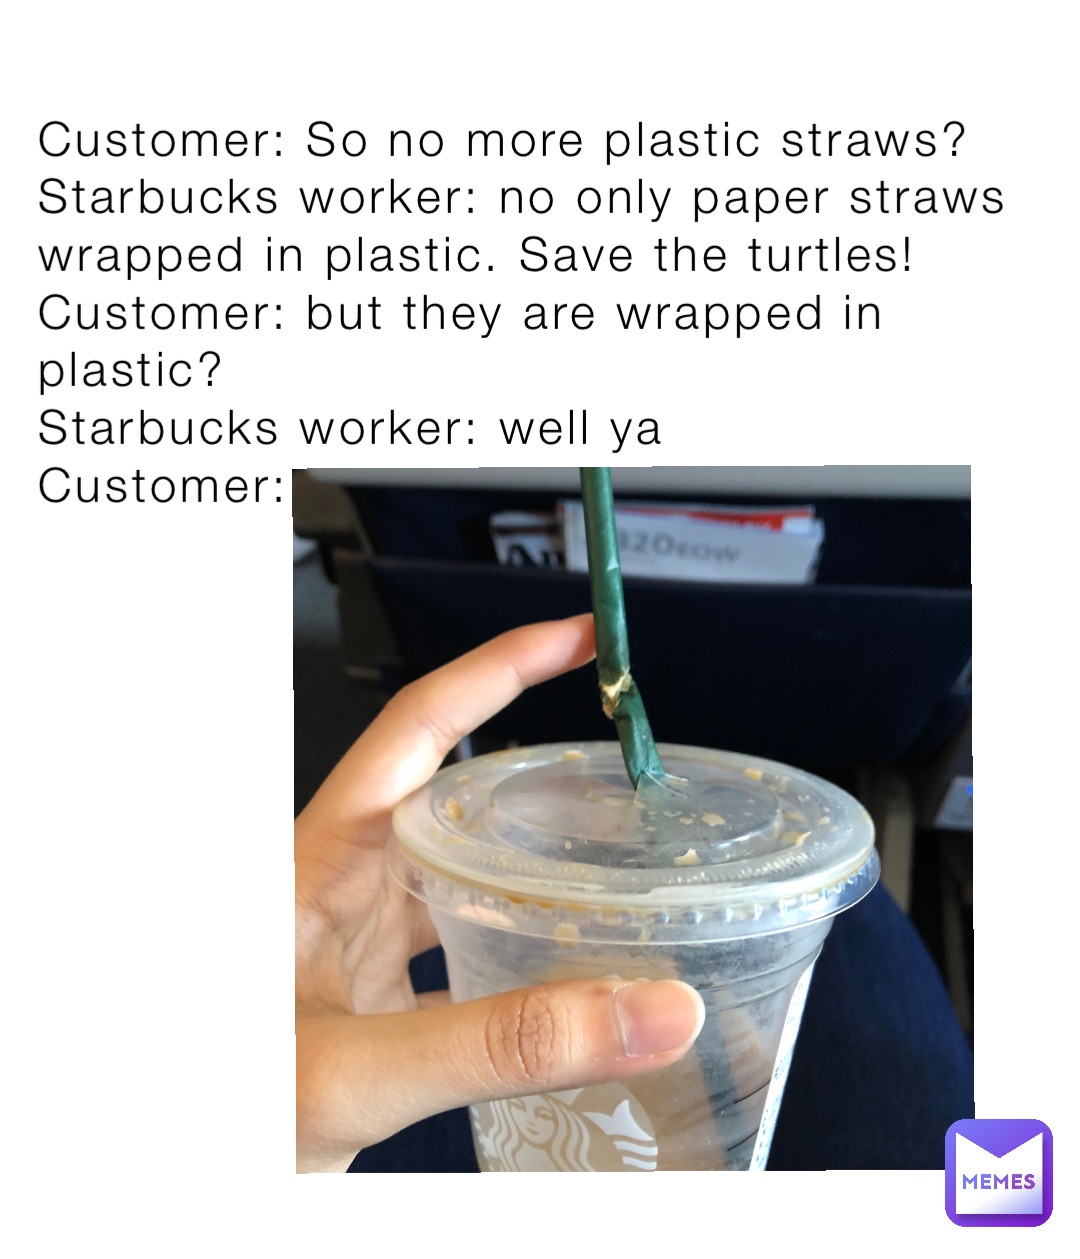 Customer: So no more plastic straws? 
Starbucks worker: no only paper straws wrapped in plastic. Save the turtles! 
Customer: but they are wrapped in plastic? 
Starbucks worker: well ya
Customer: ……..